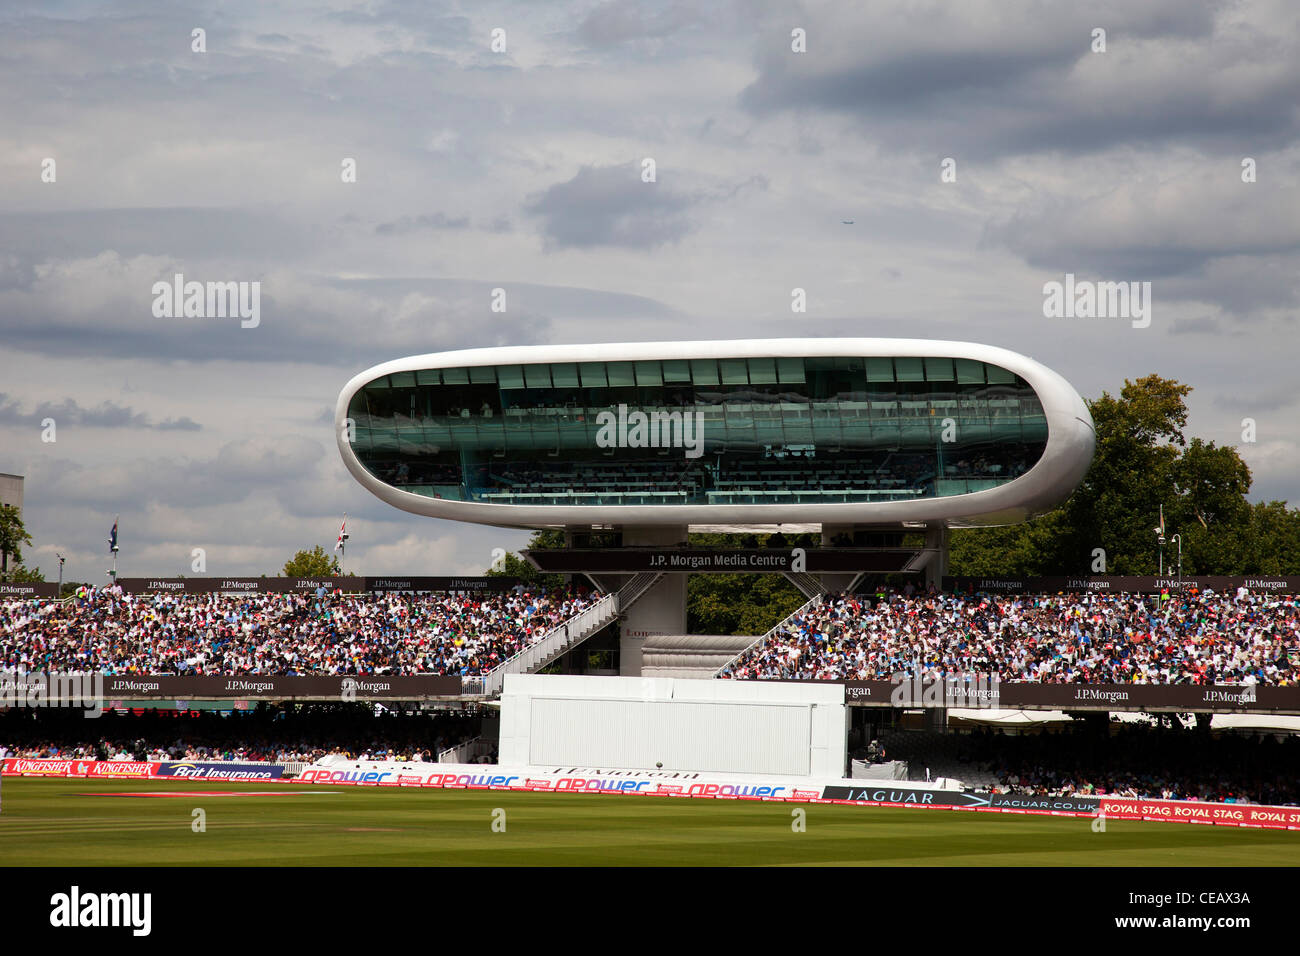 Test match being played at Lords Cricket Ground, London, UK. Stock Photo